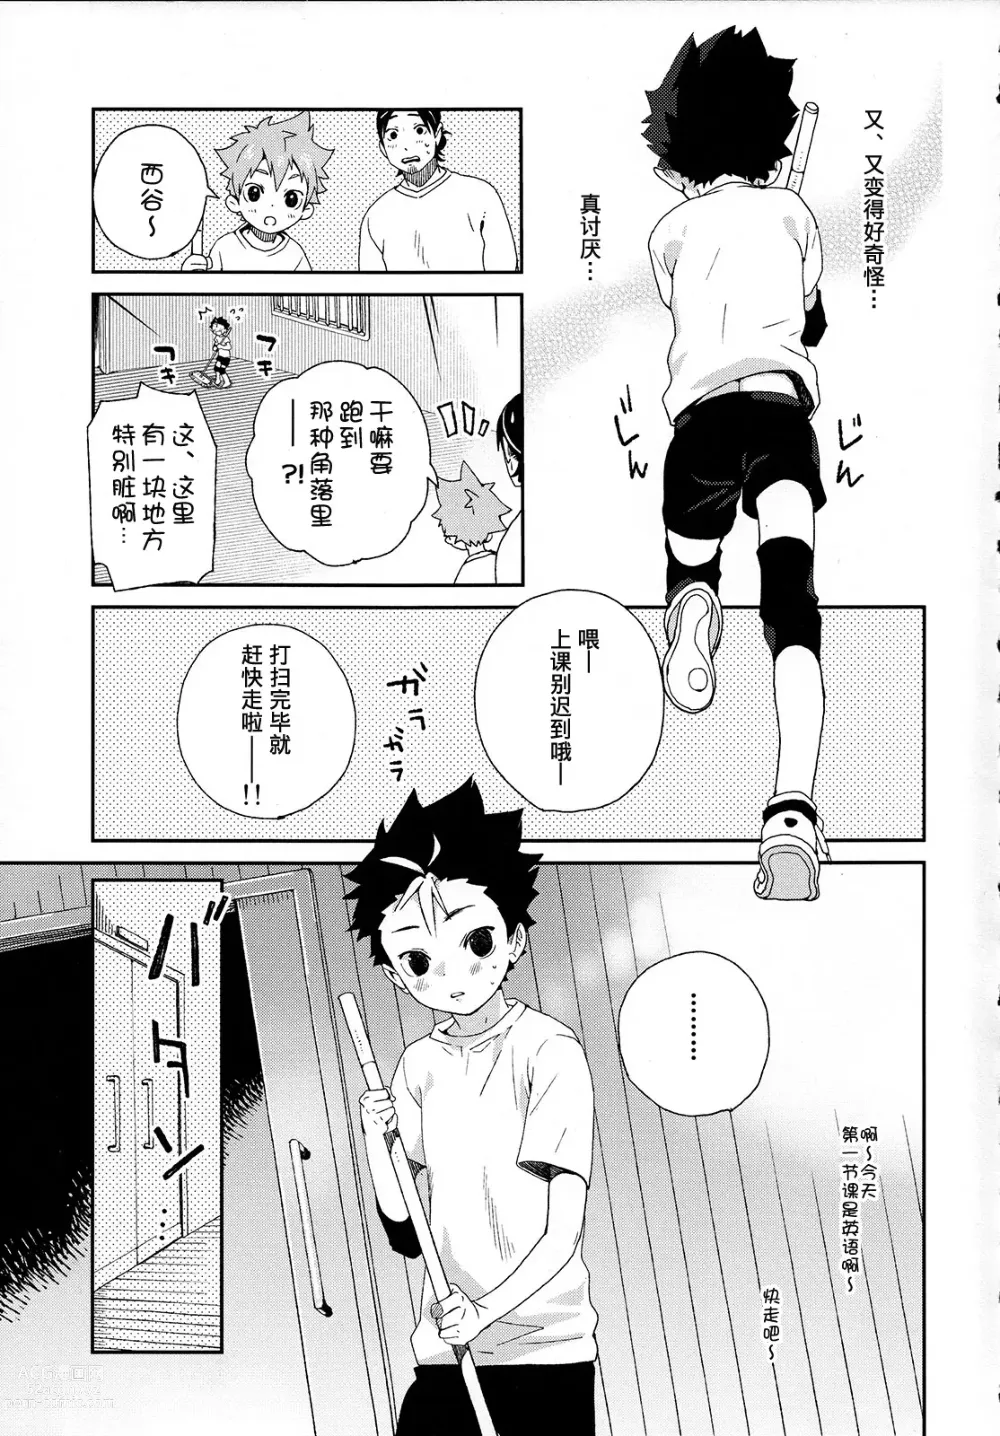 Page 11 of doujinshi 西谷君的发情期